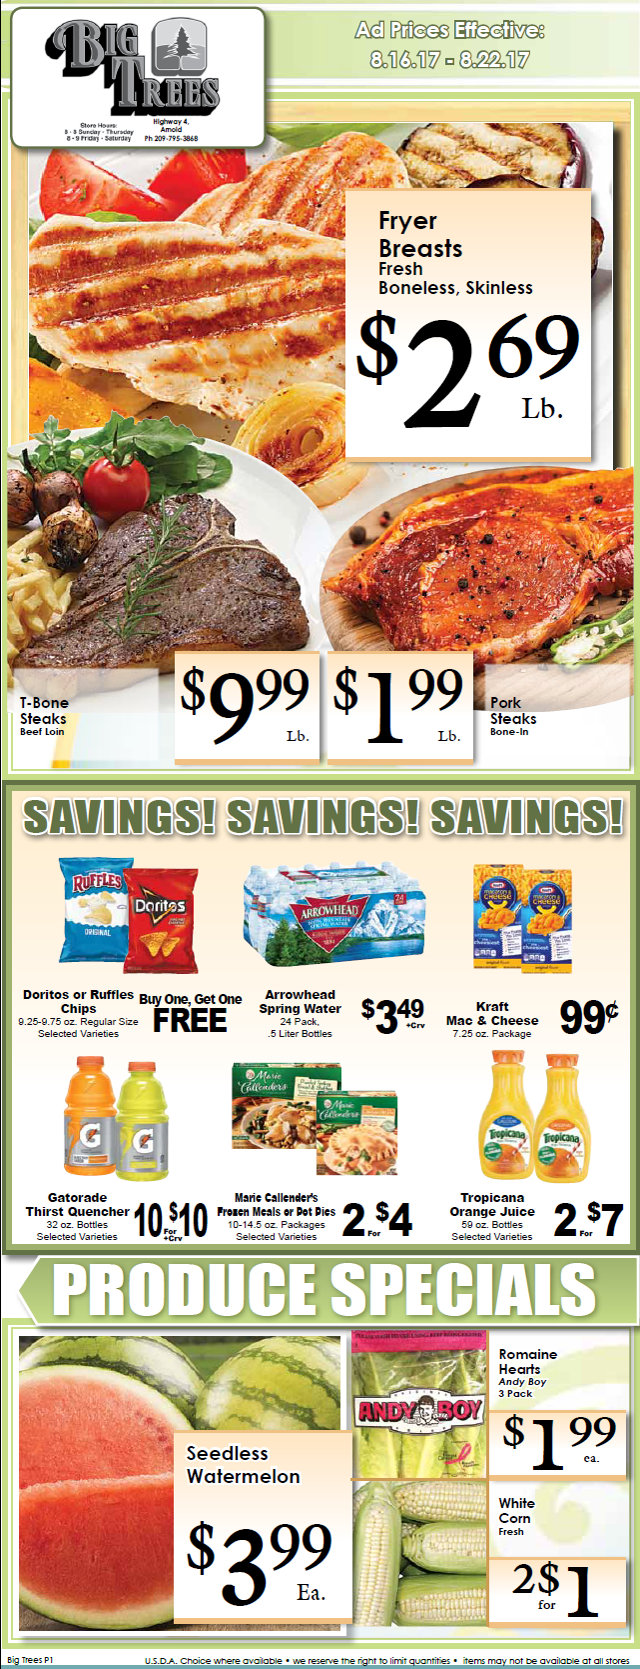 Big Trees Market Weekly Ad & Specials Through August 22nd